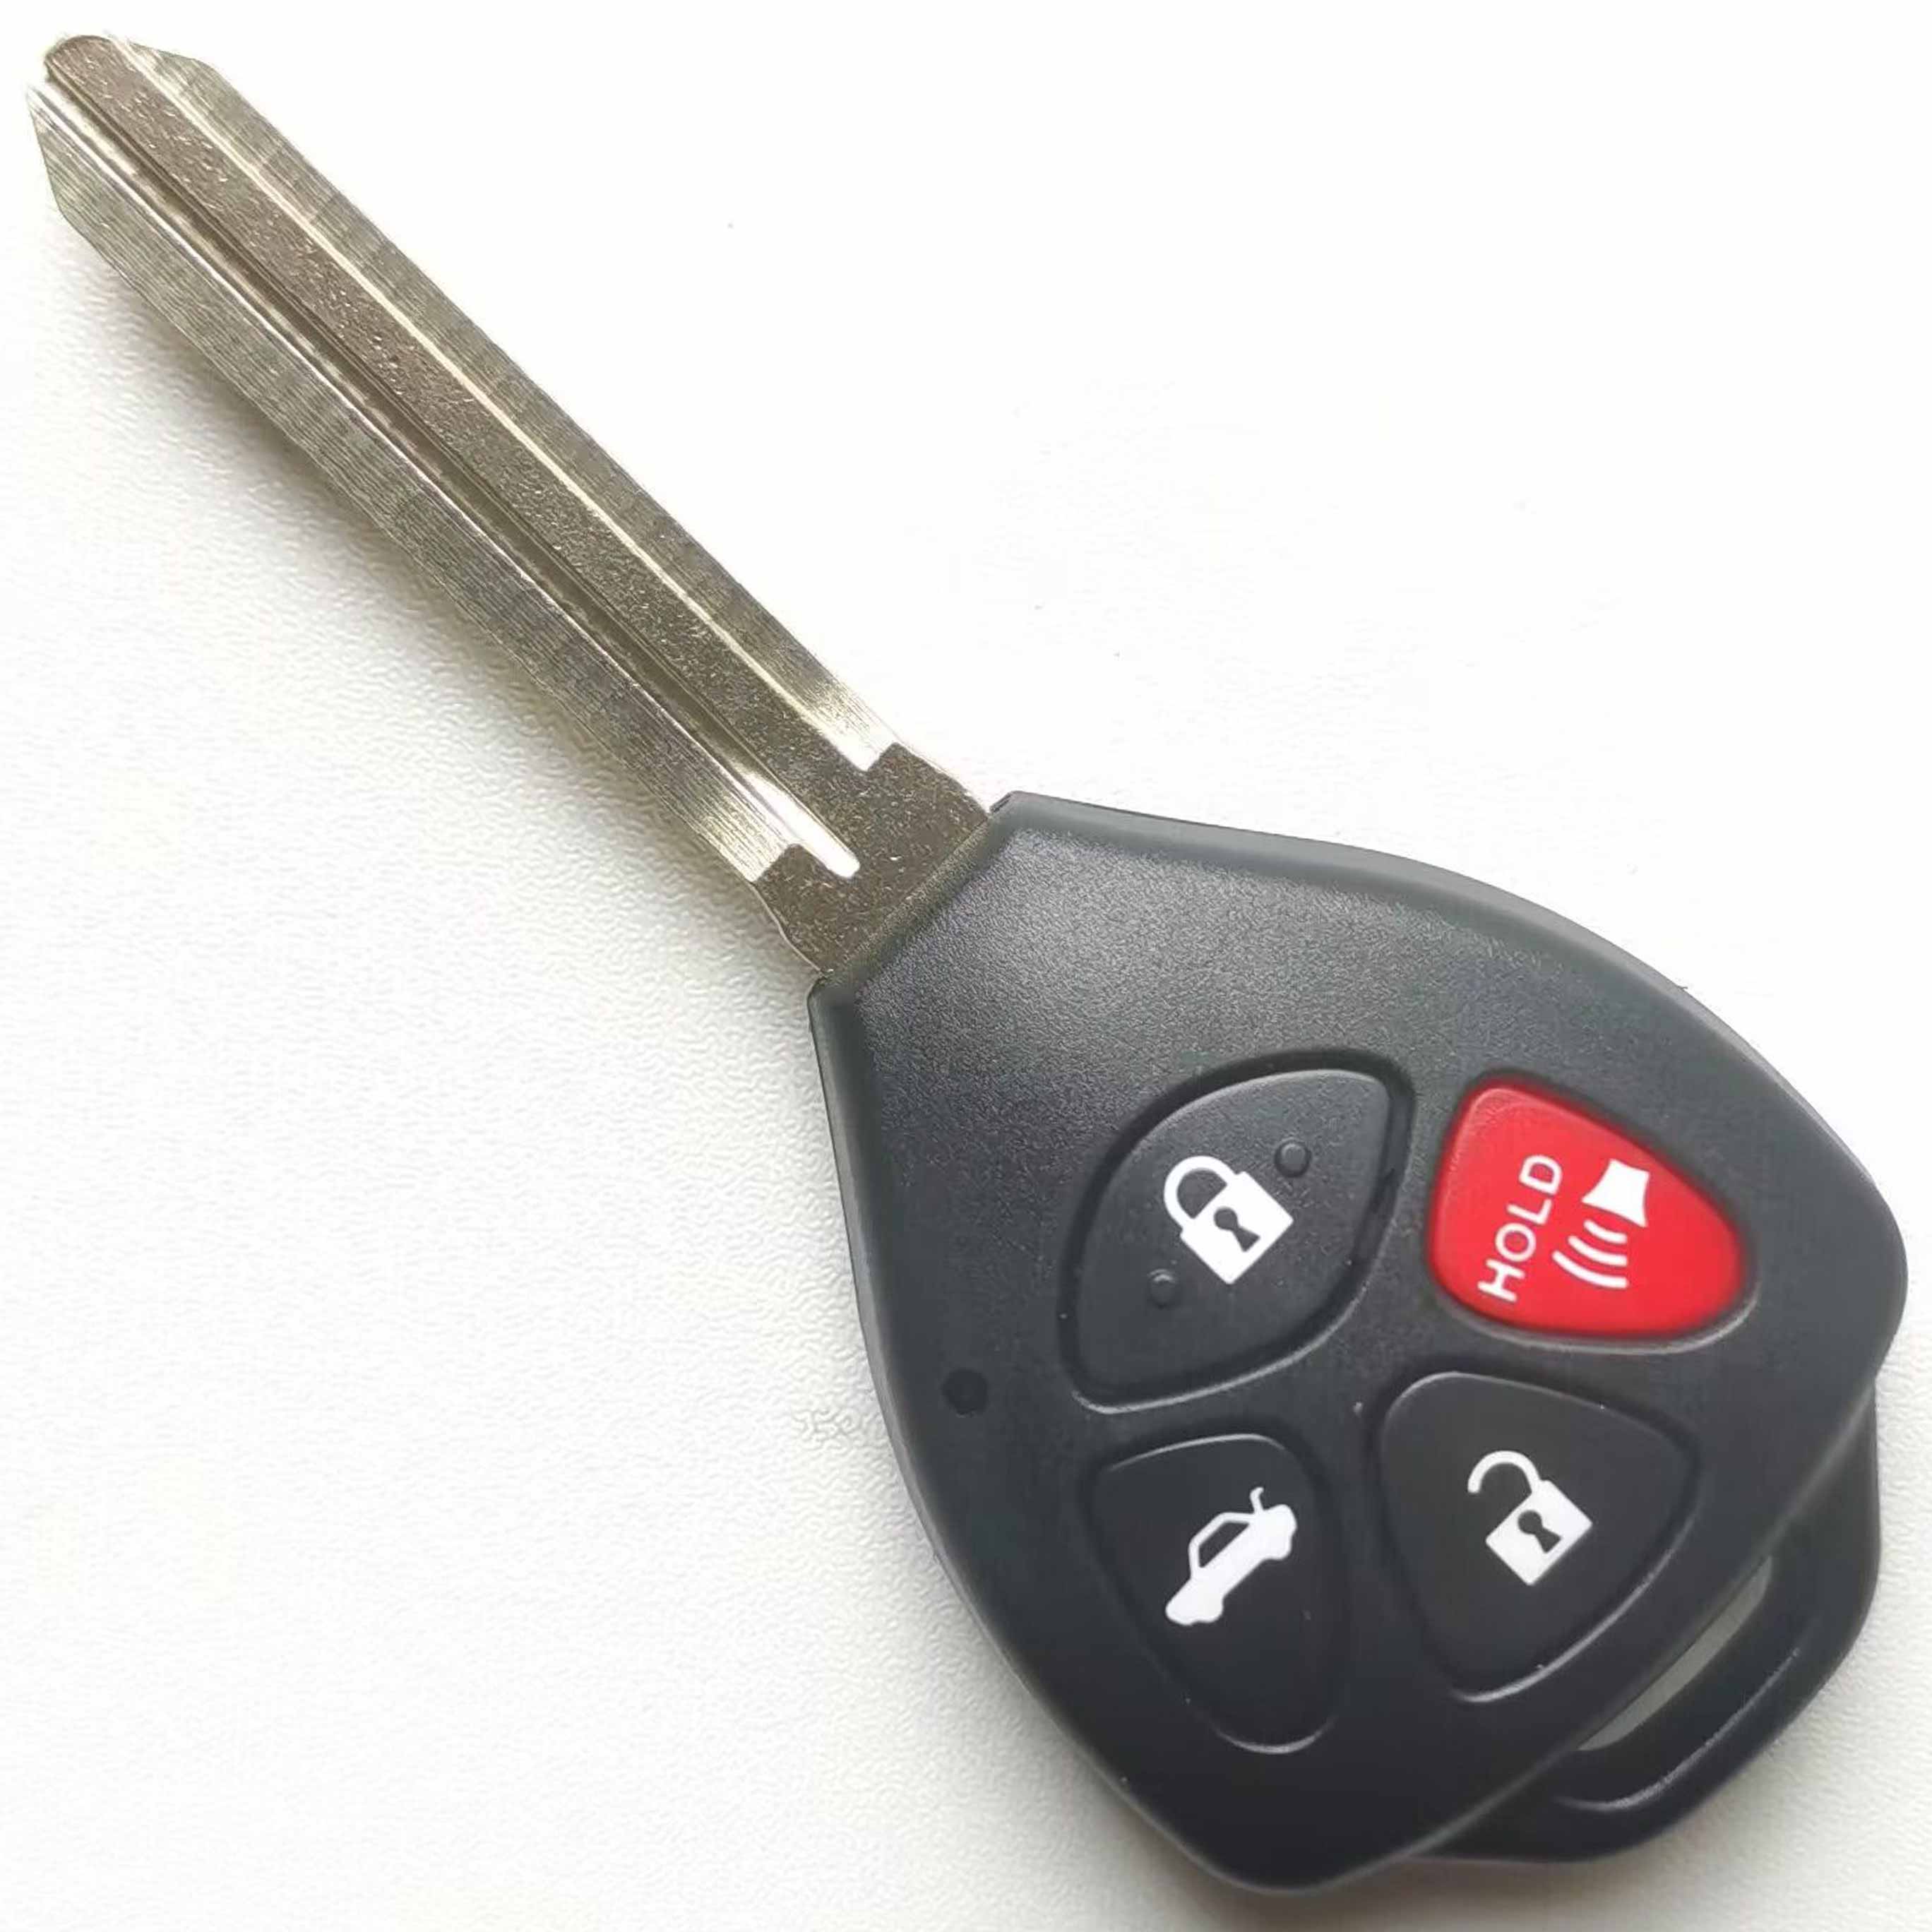 433 MHz Remote Key for Hilux / 89071-33340 33341 33342 33360 / G Chip